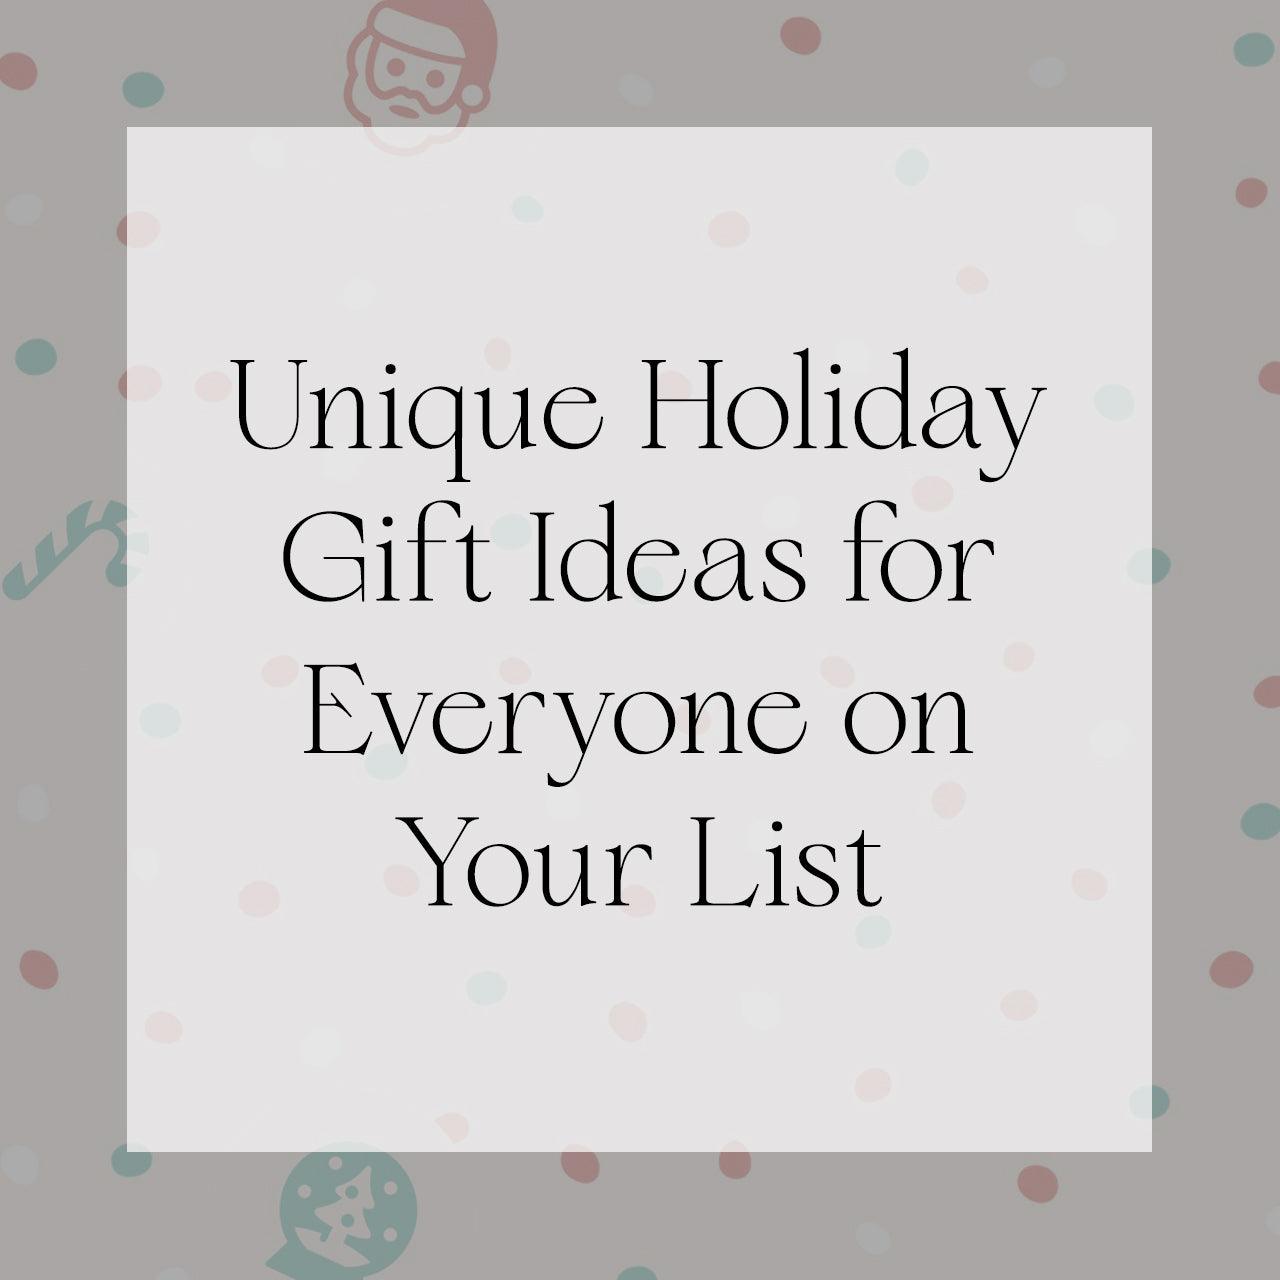 Unique Holiday Gift Ideas for Everyone on Your List - Singhvis